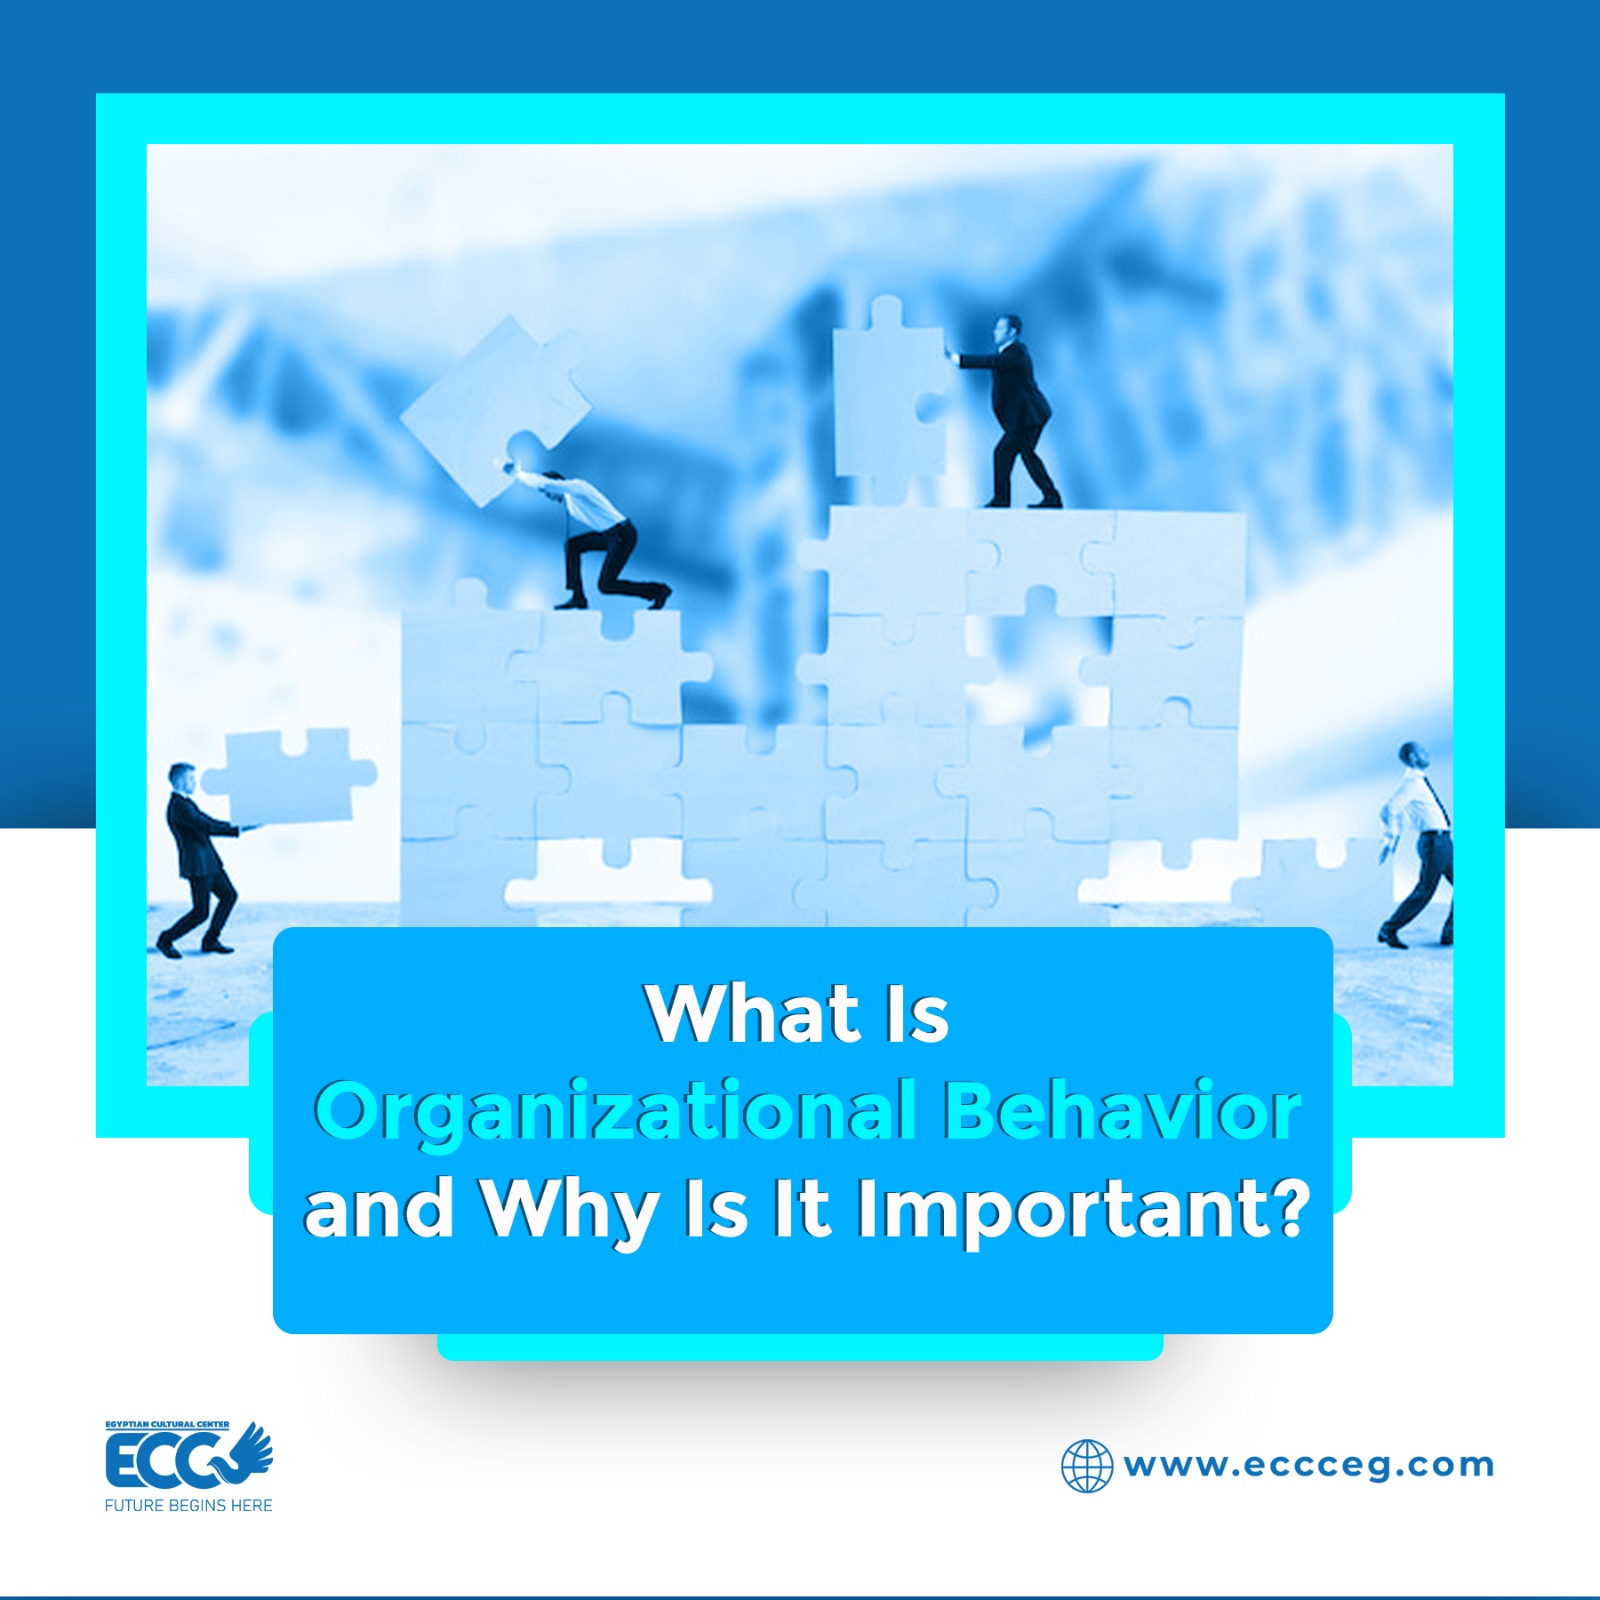 What Is Organizational Behavior (OB), and Why Is It Important?